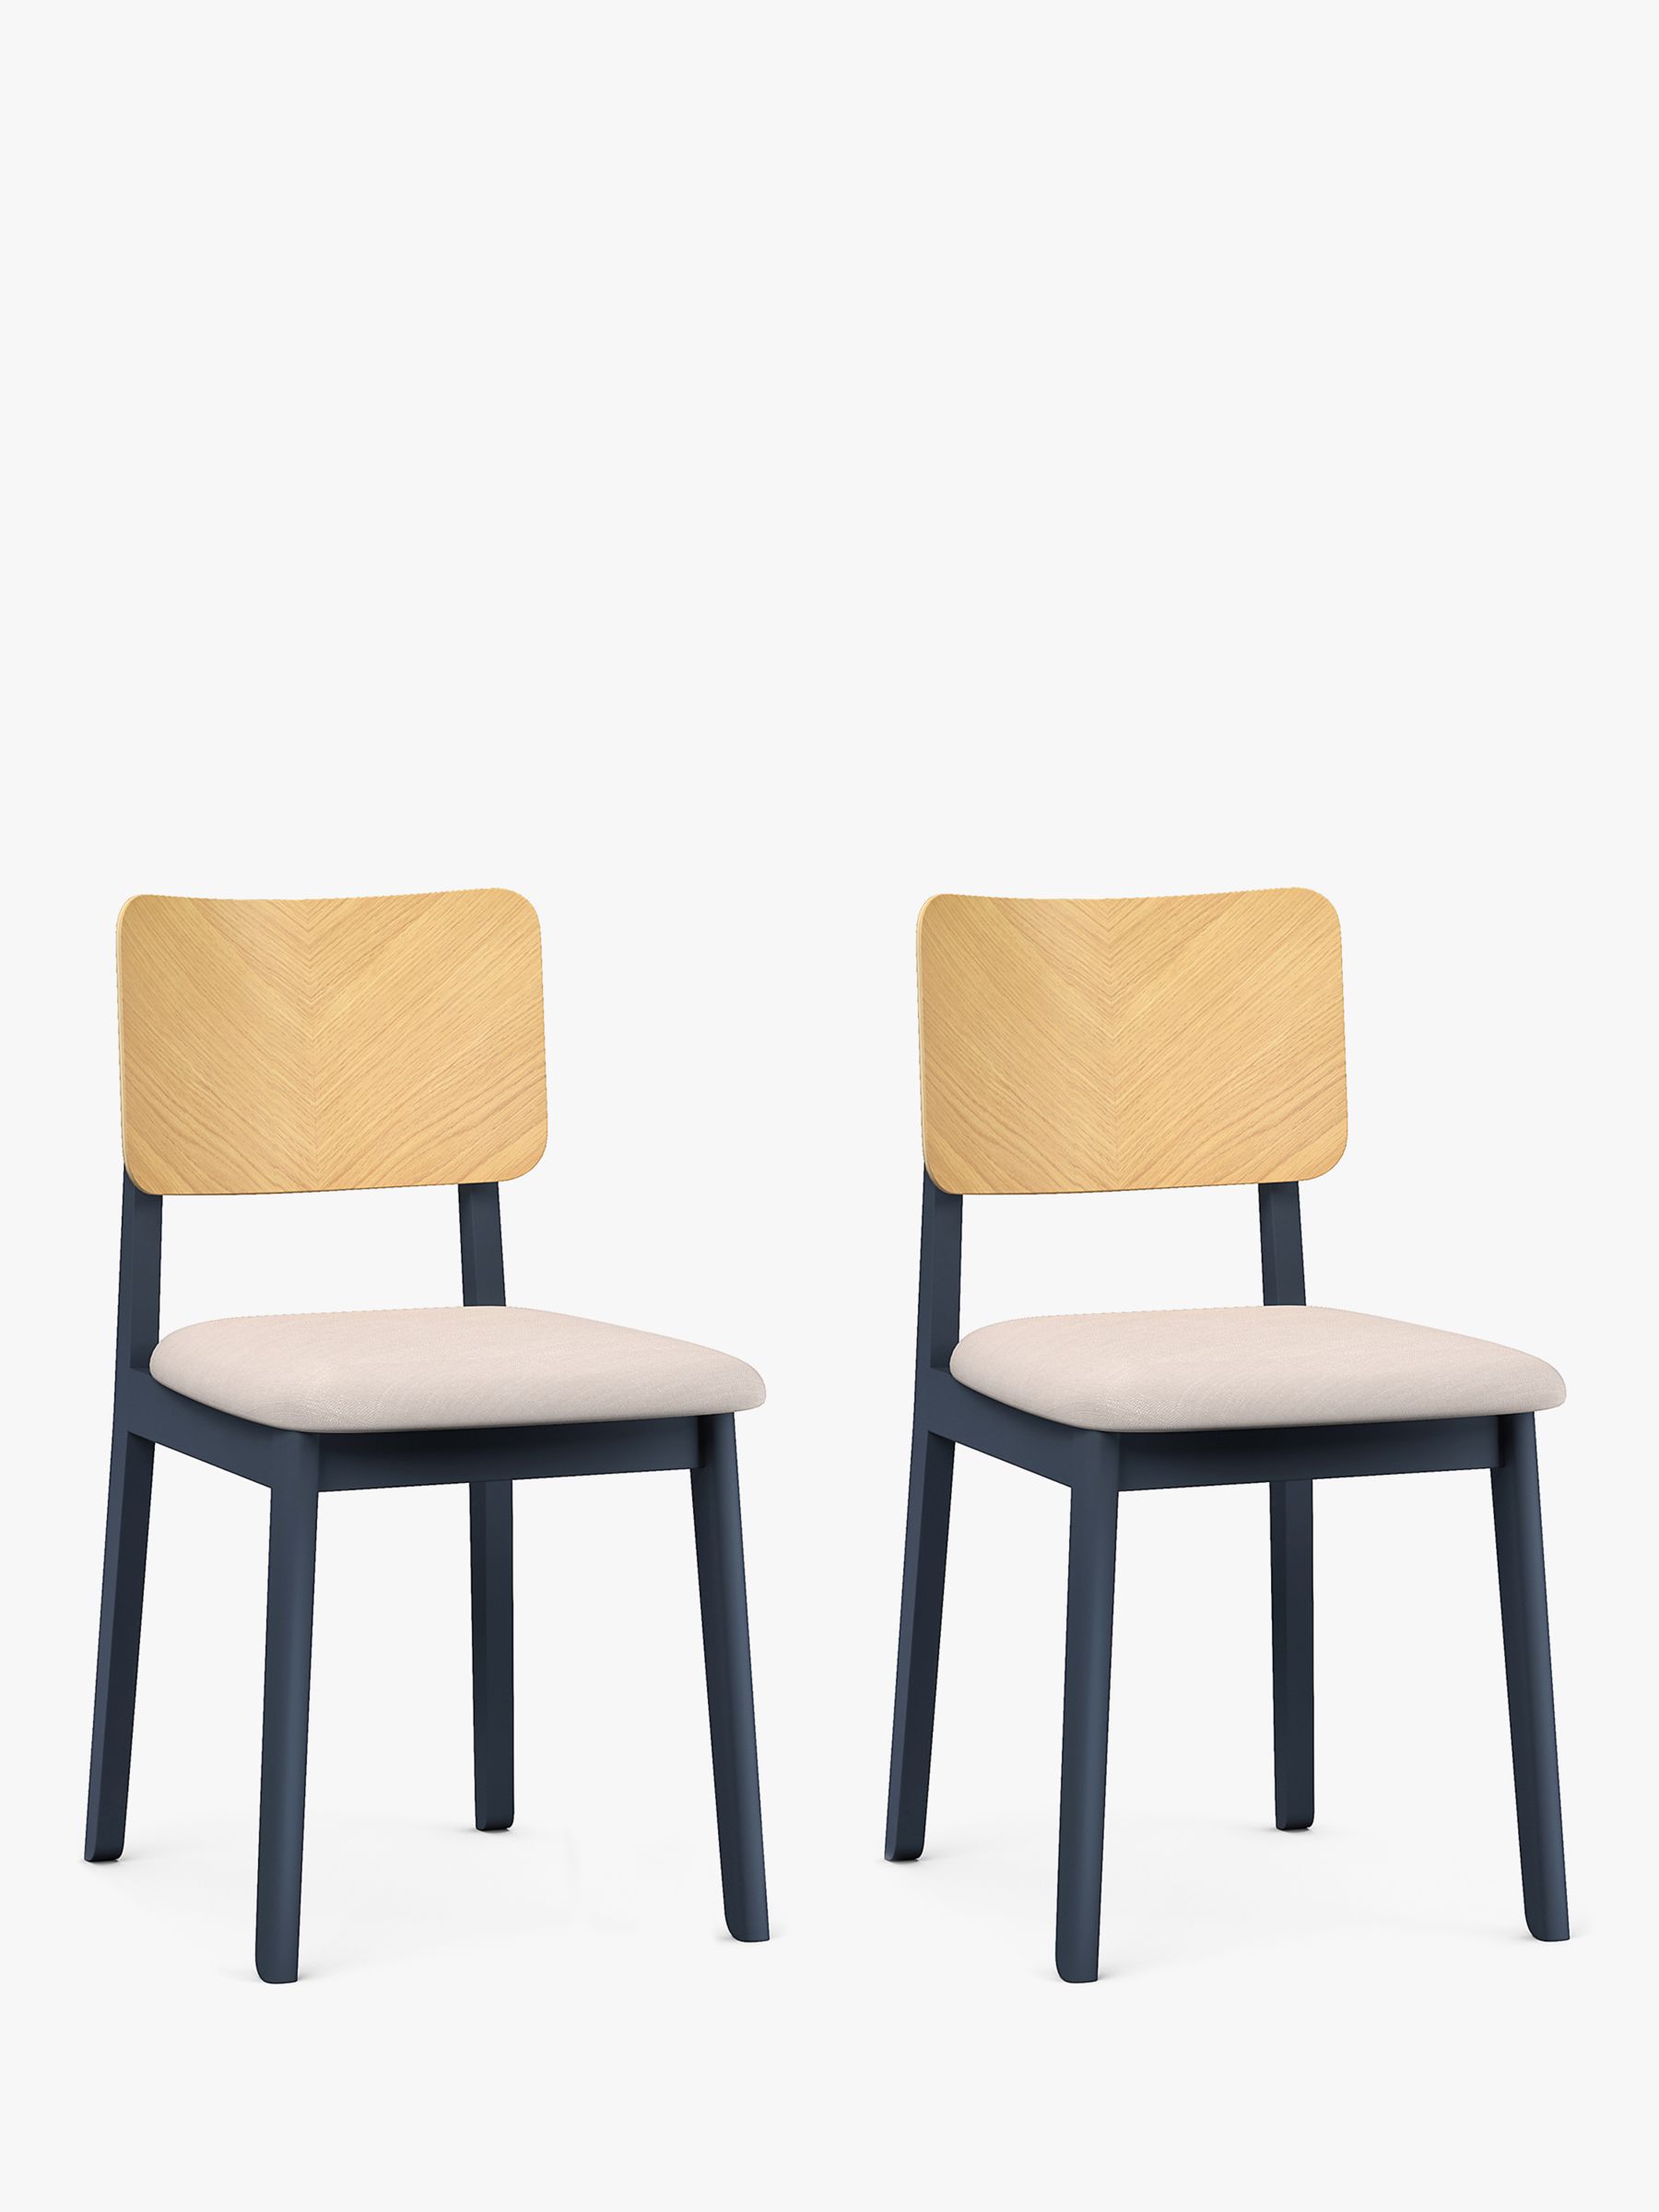 ANYDAY John Lewis & Partners Fern Dining Chairs, Set of 2, Ink